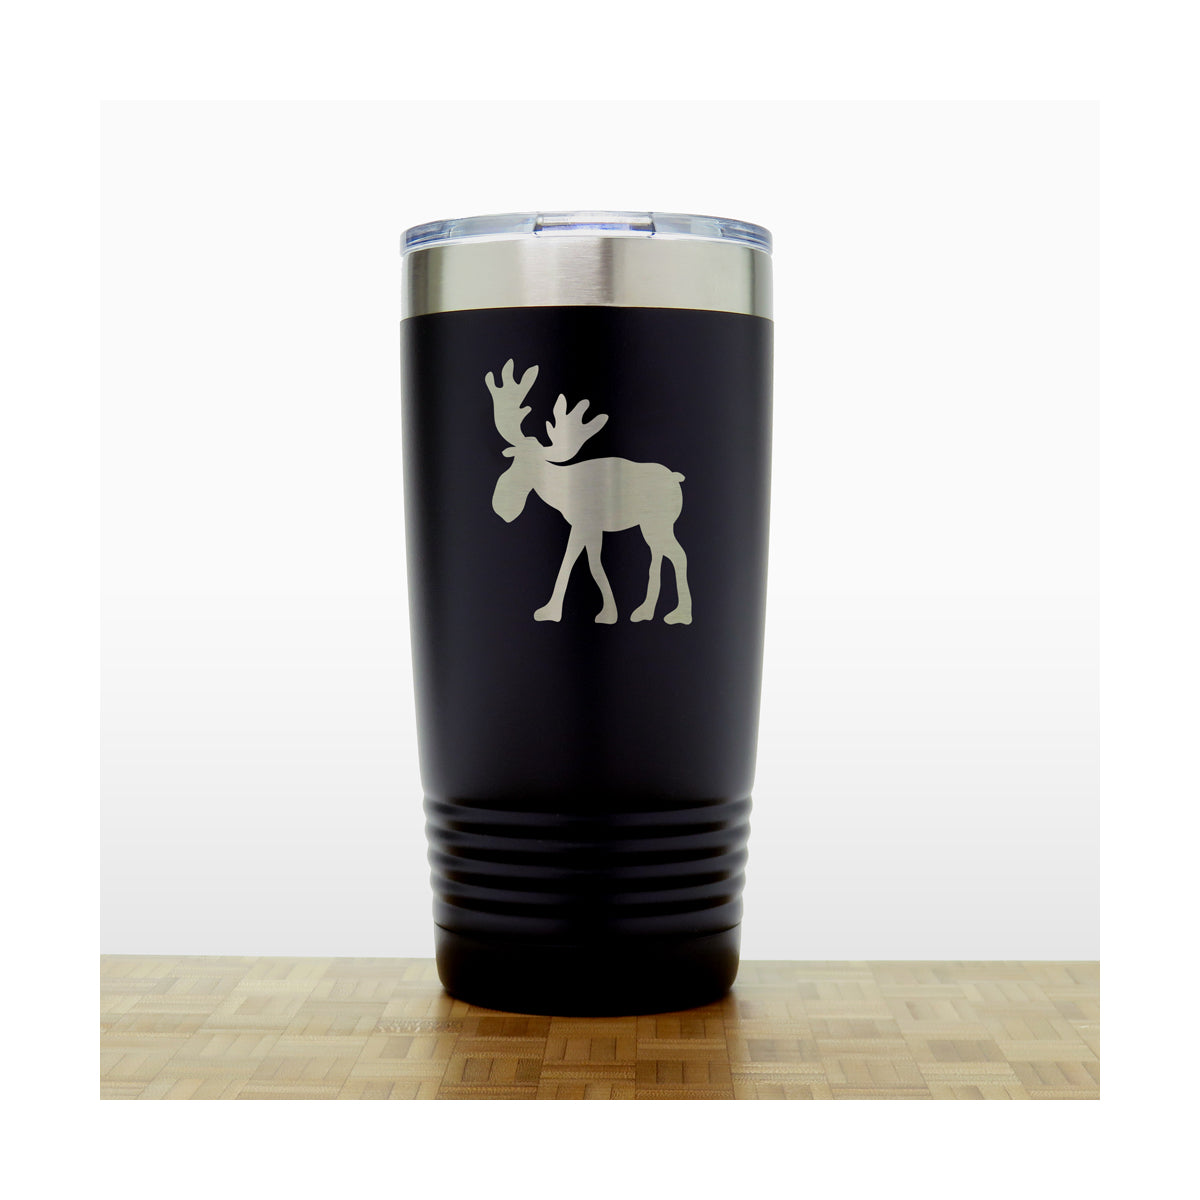 Black - Moose Whimsical 3 20 oz Insulated Tumbler - Copyright Hues in Glass